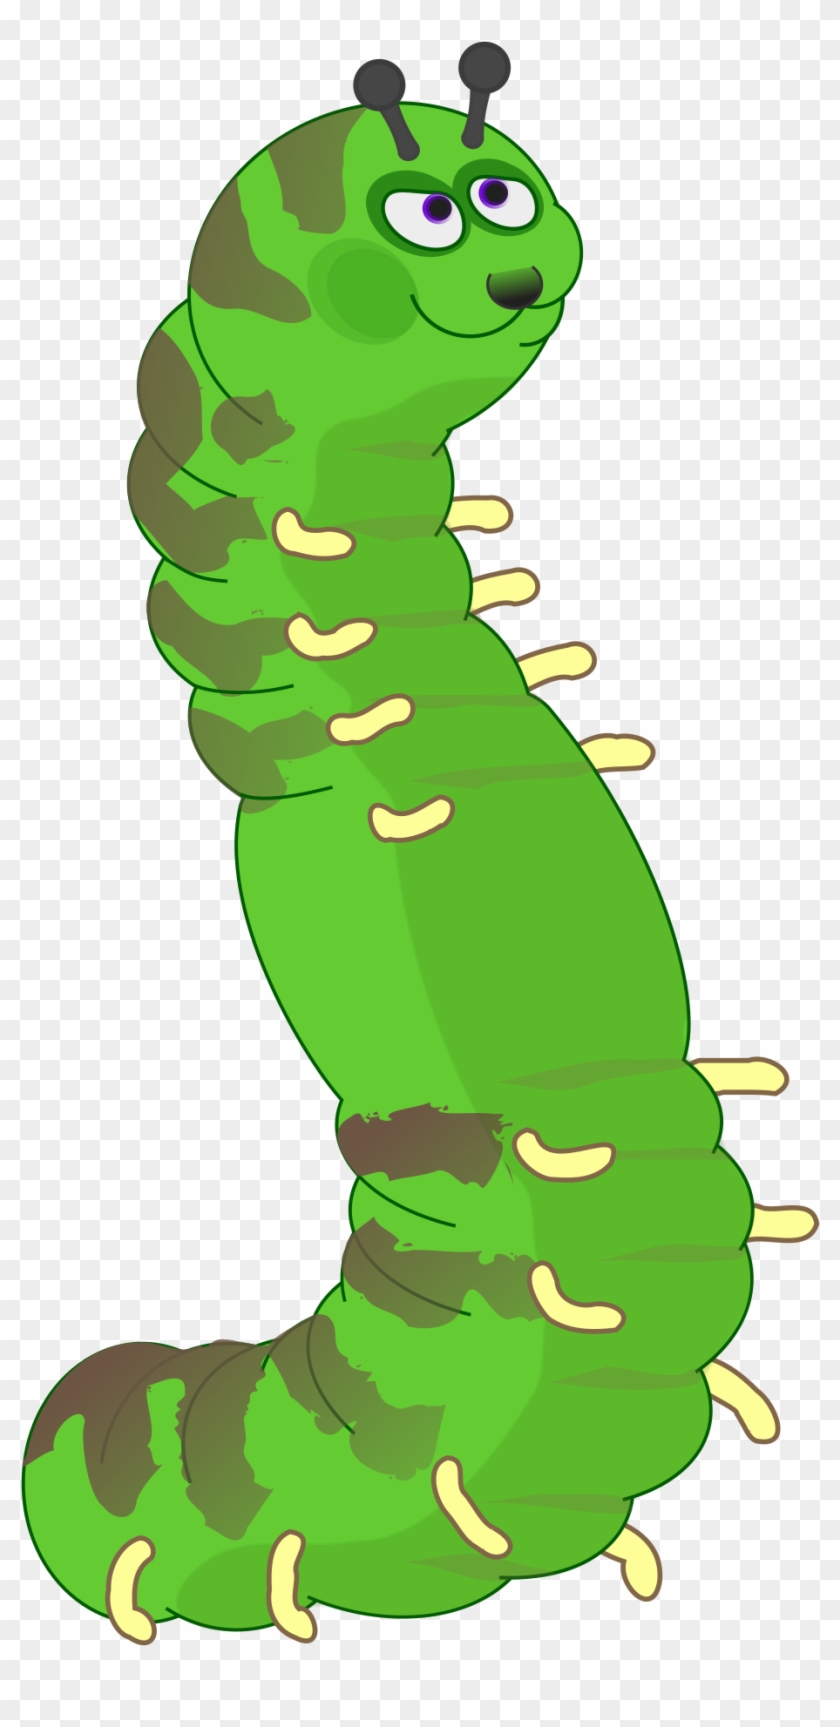 This Free Icons Png Design Of Caterpillar 4 Ldap Clipart #184294